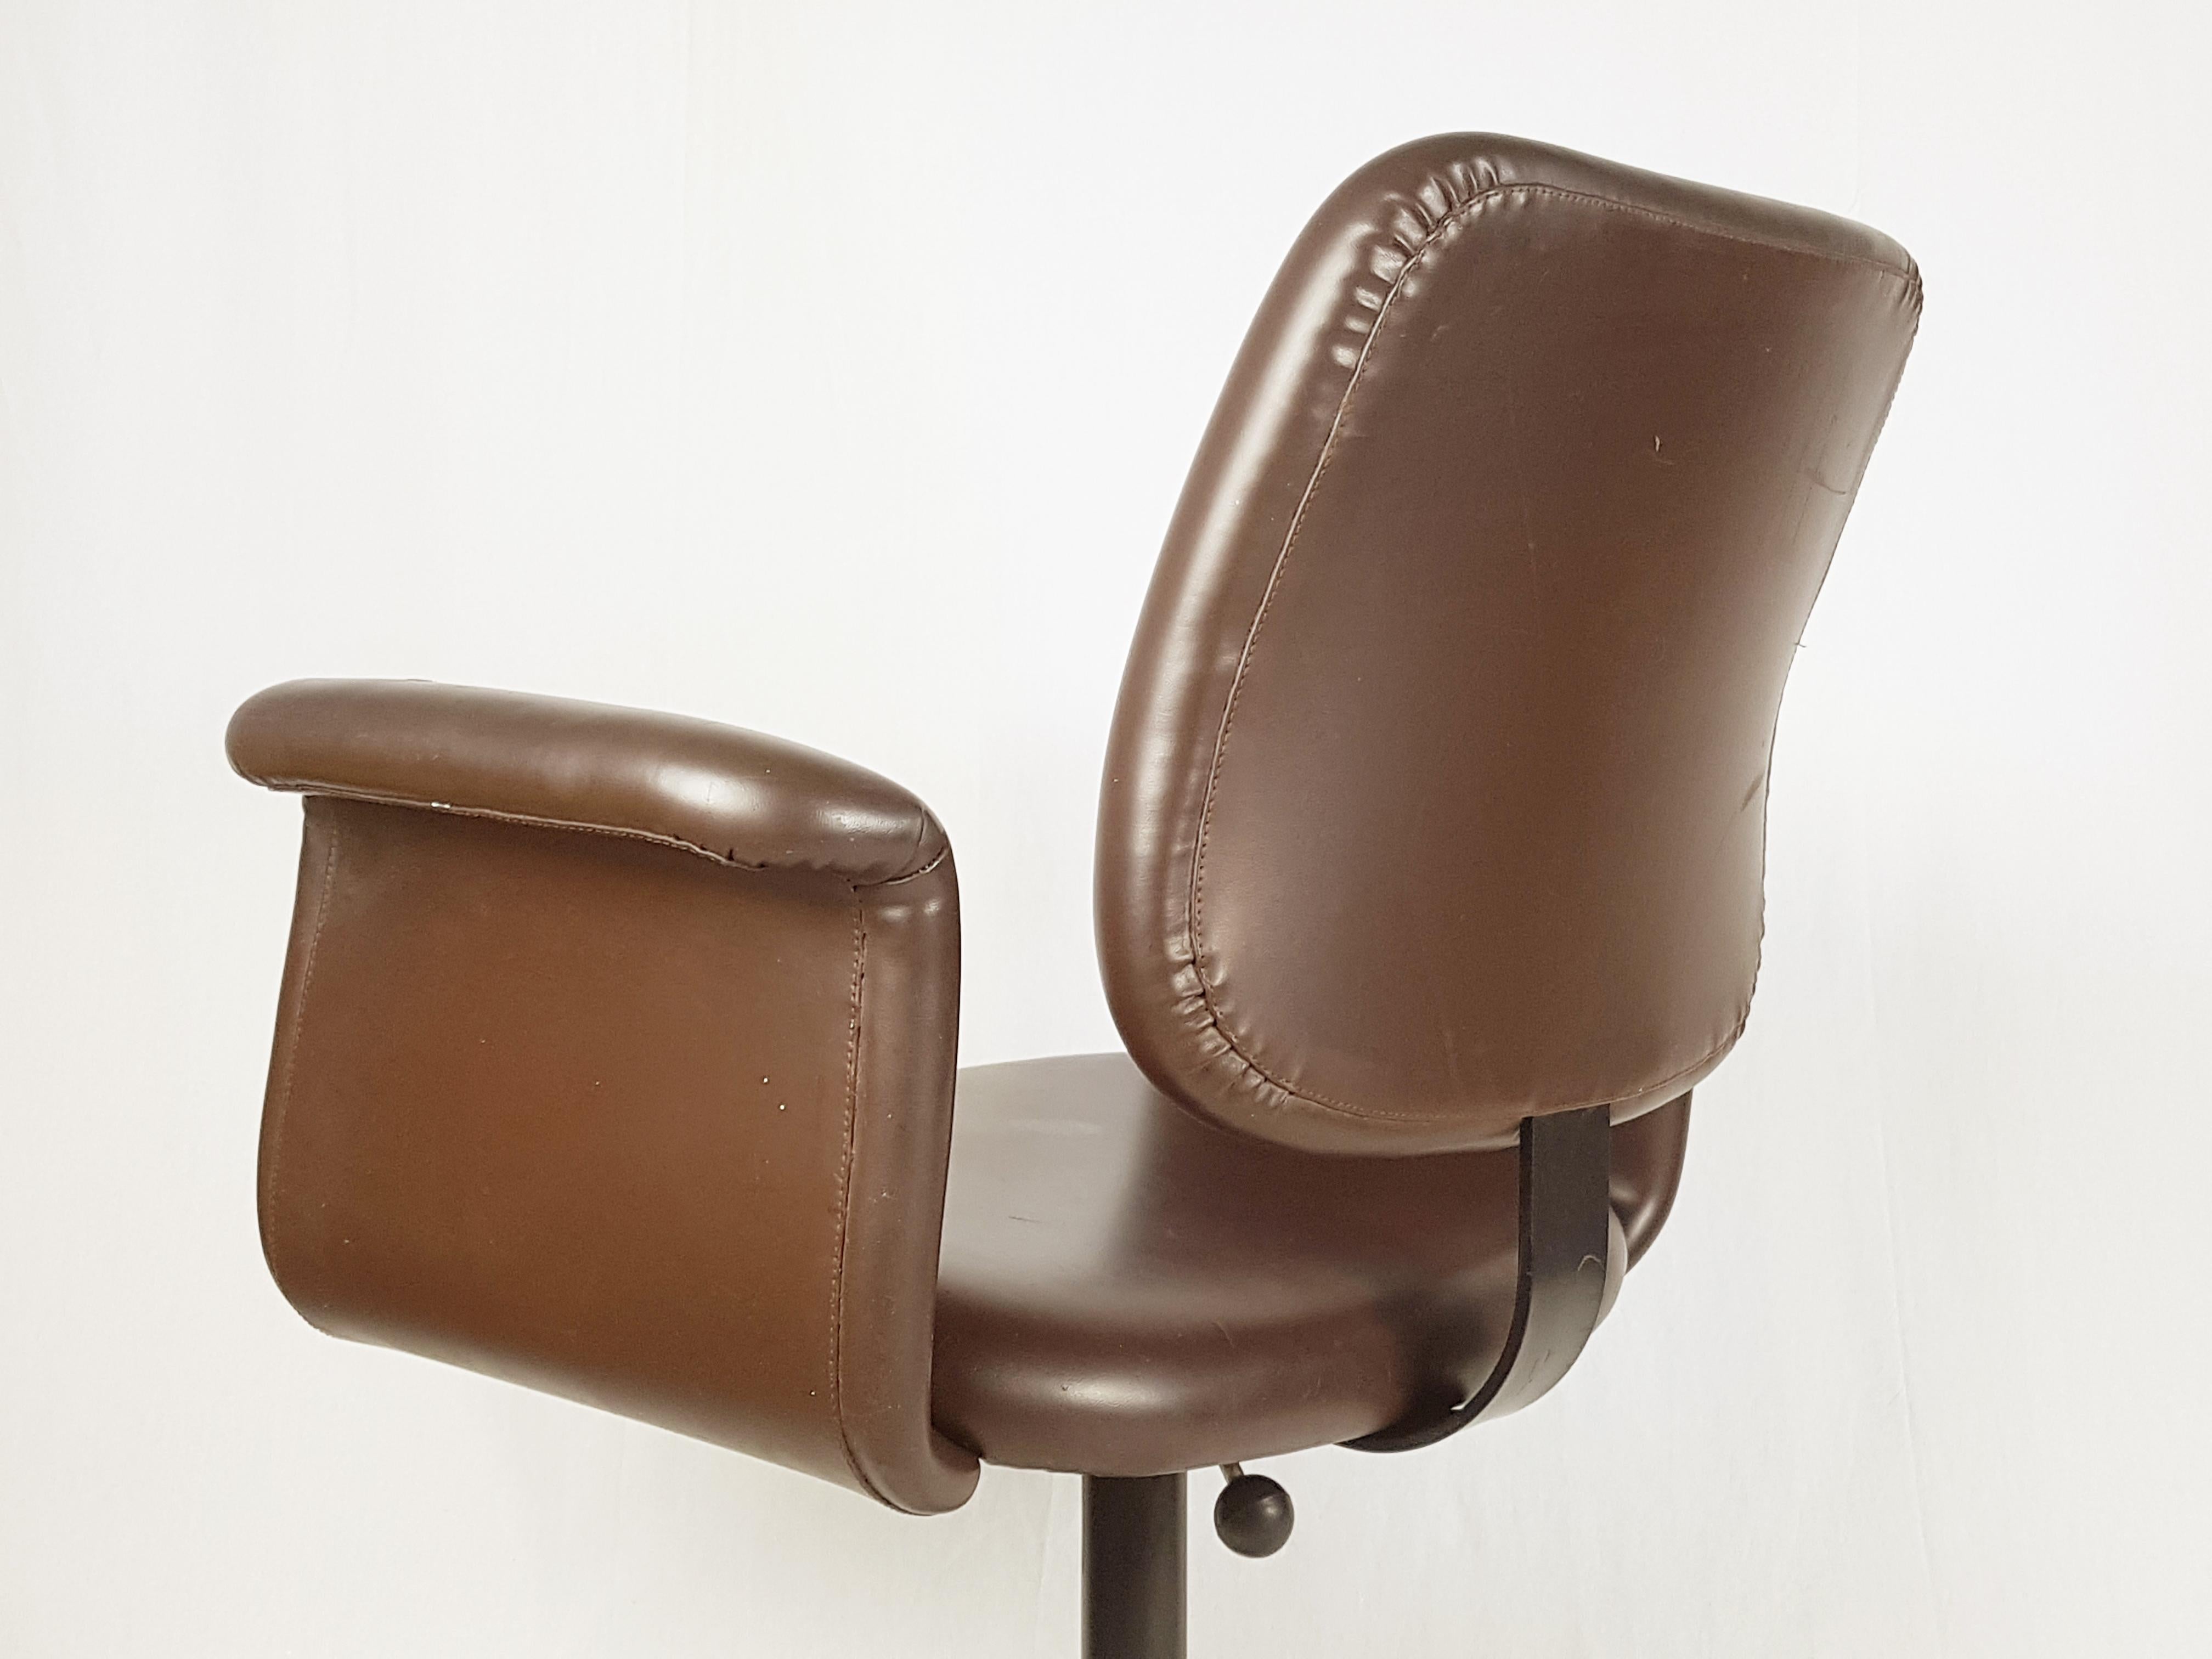 what type of office chair was invented in the ’70s